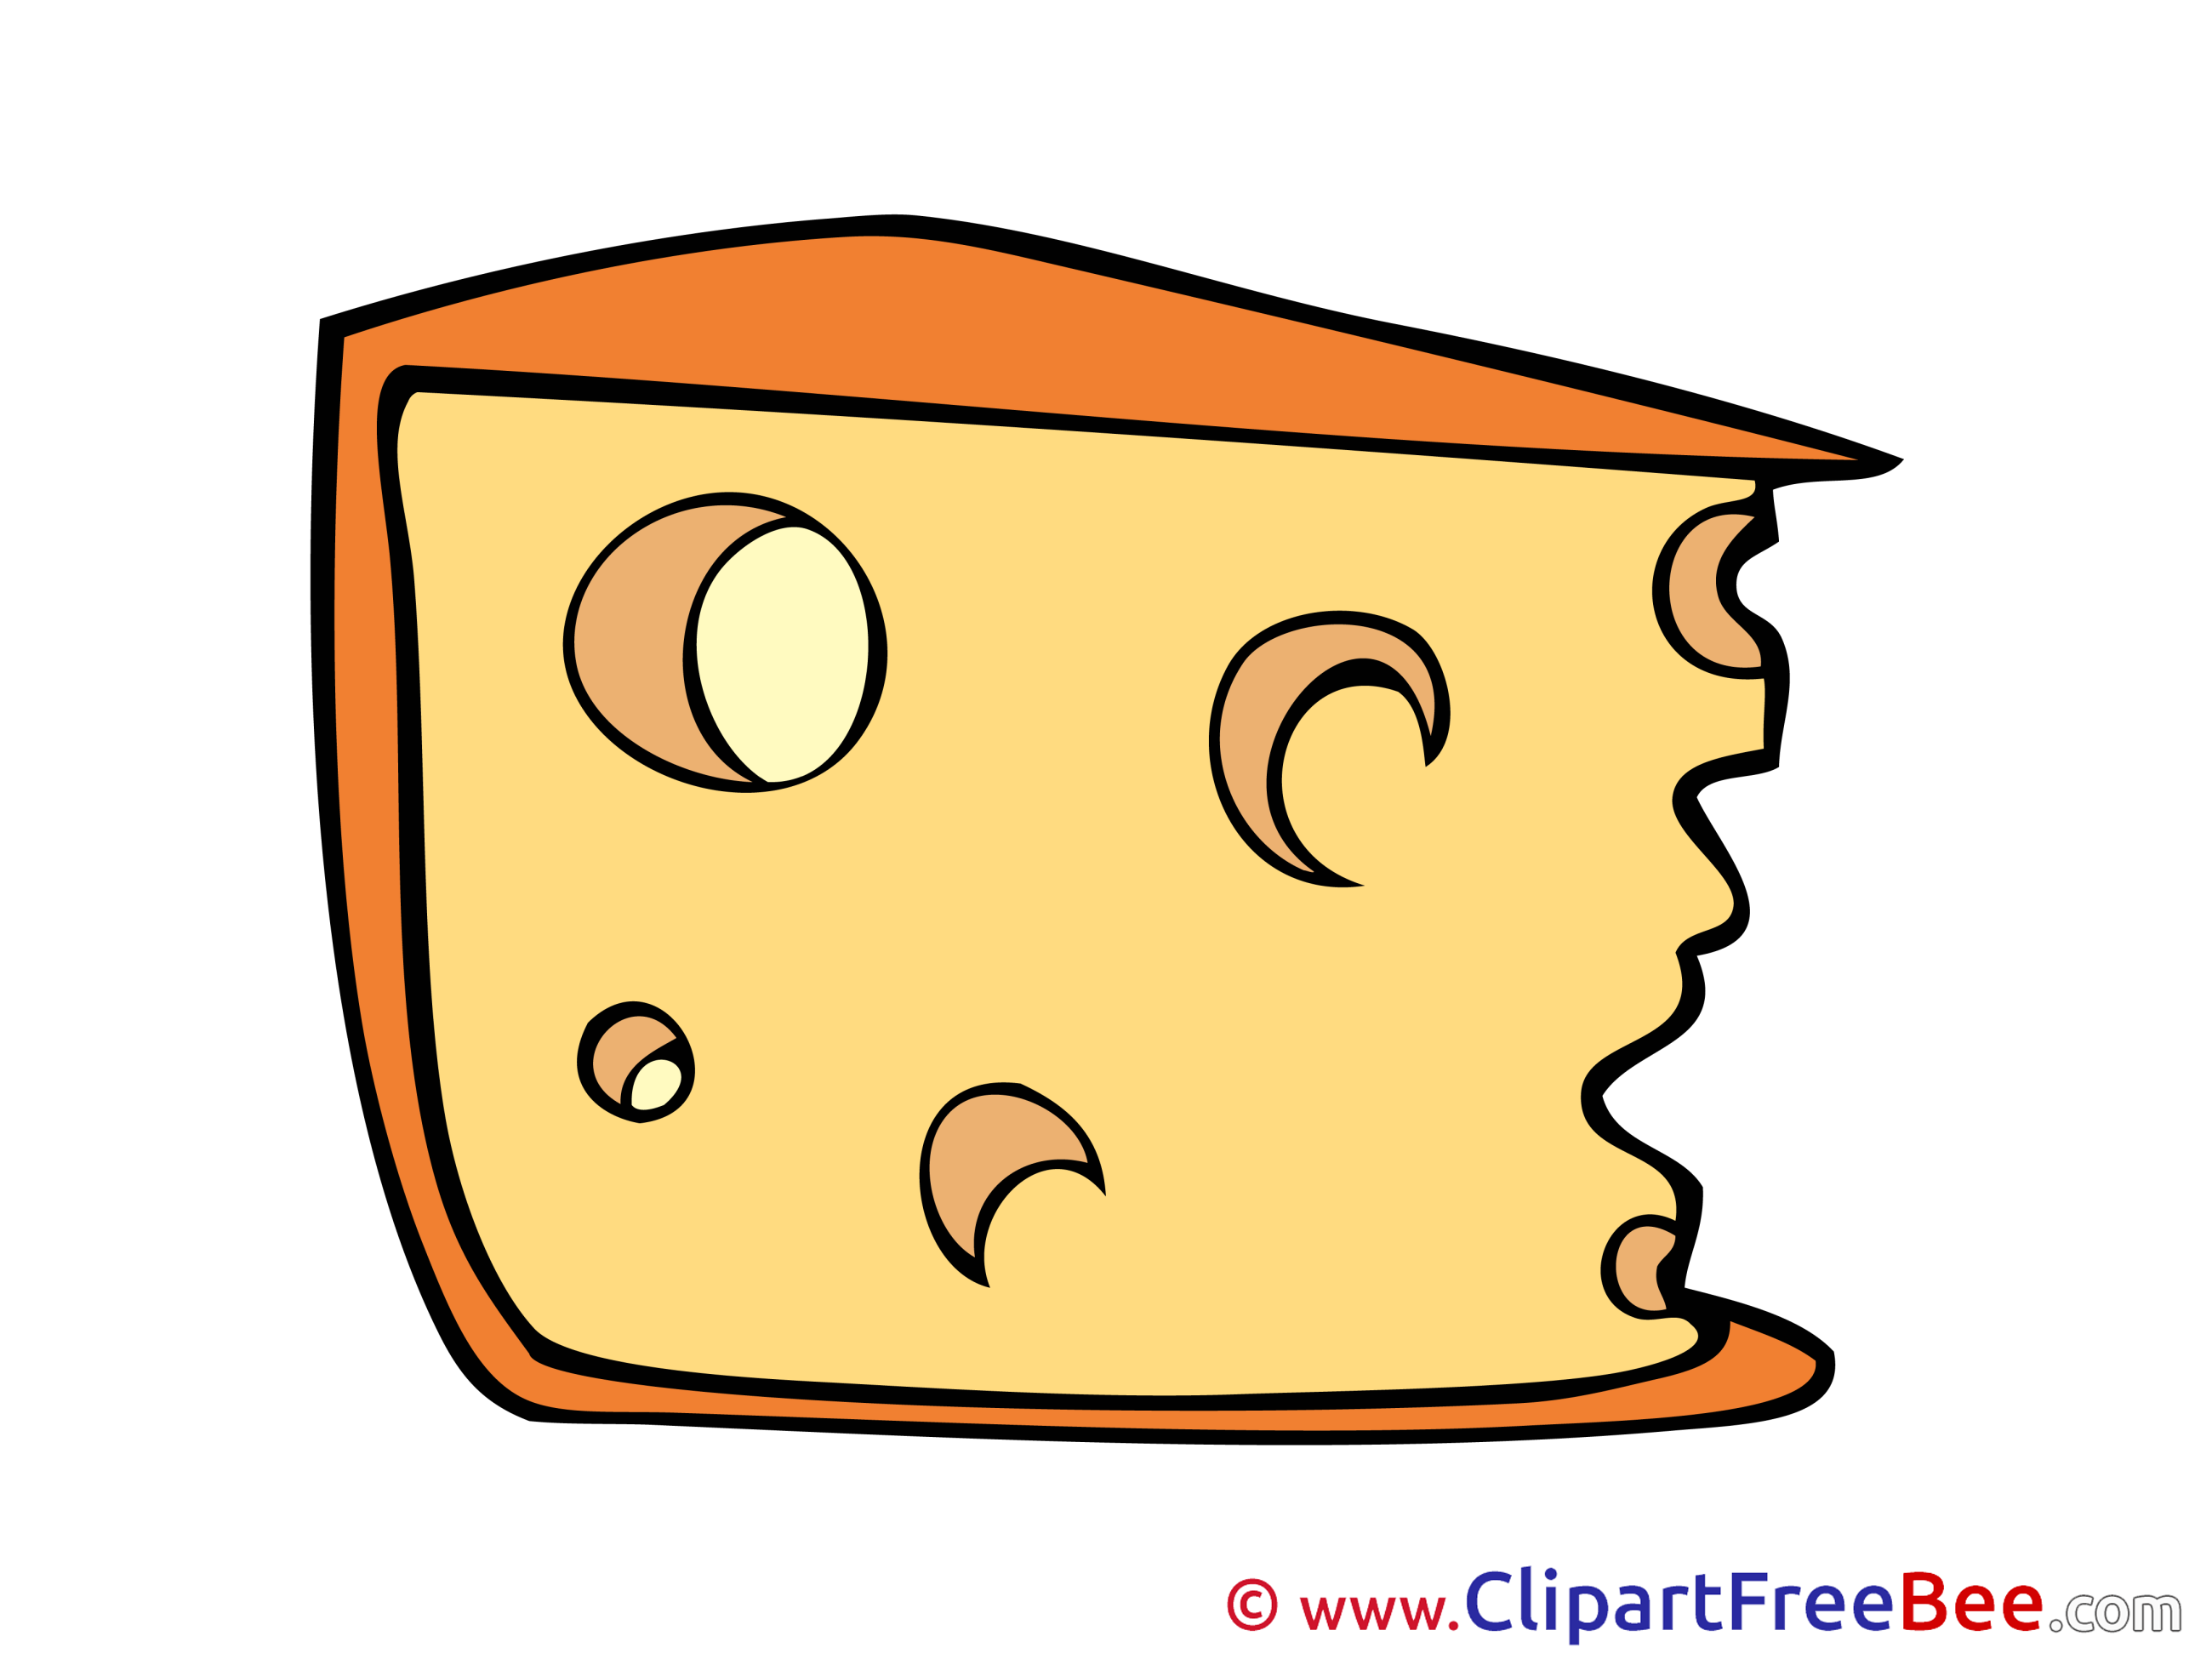 Cheese Pics free download Image